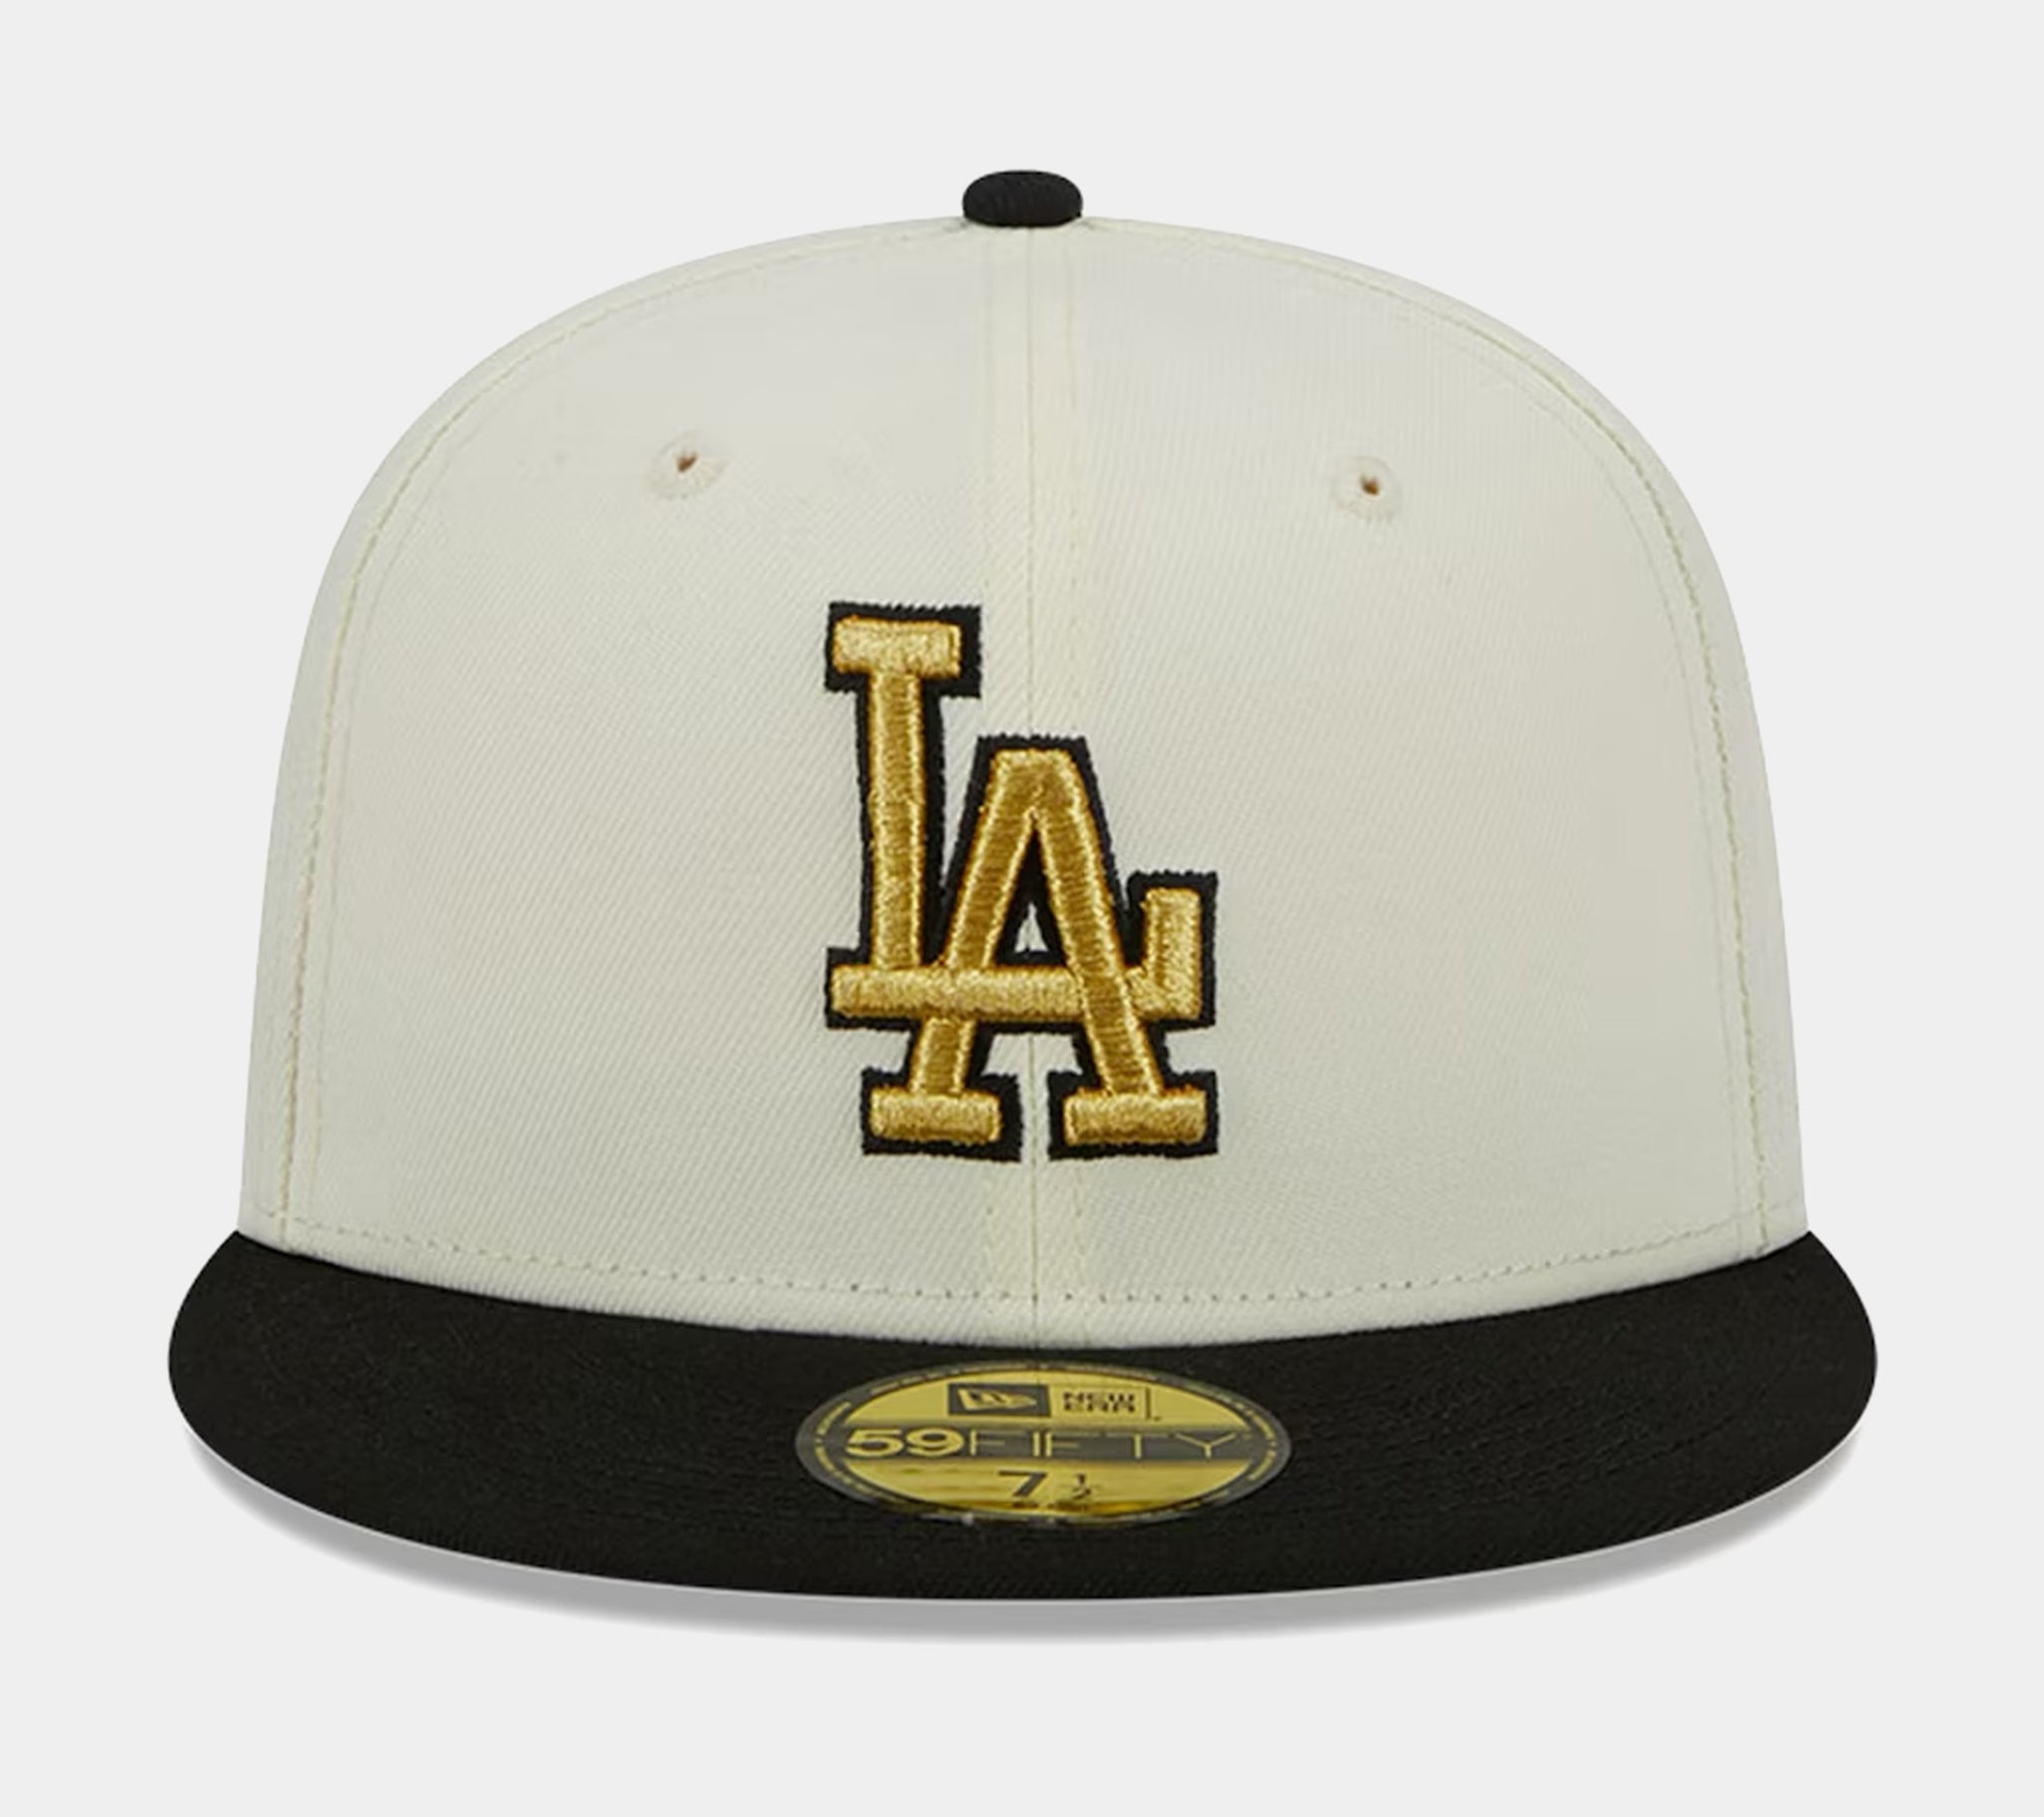 Los Angeles Dodgers City Icon 59FIFTY Mens Hat (Beige/Black)